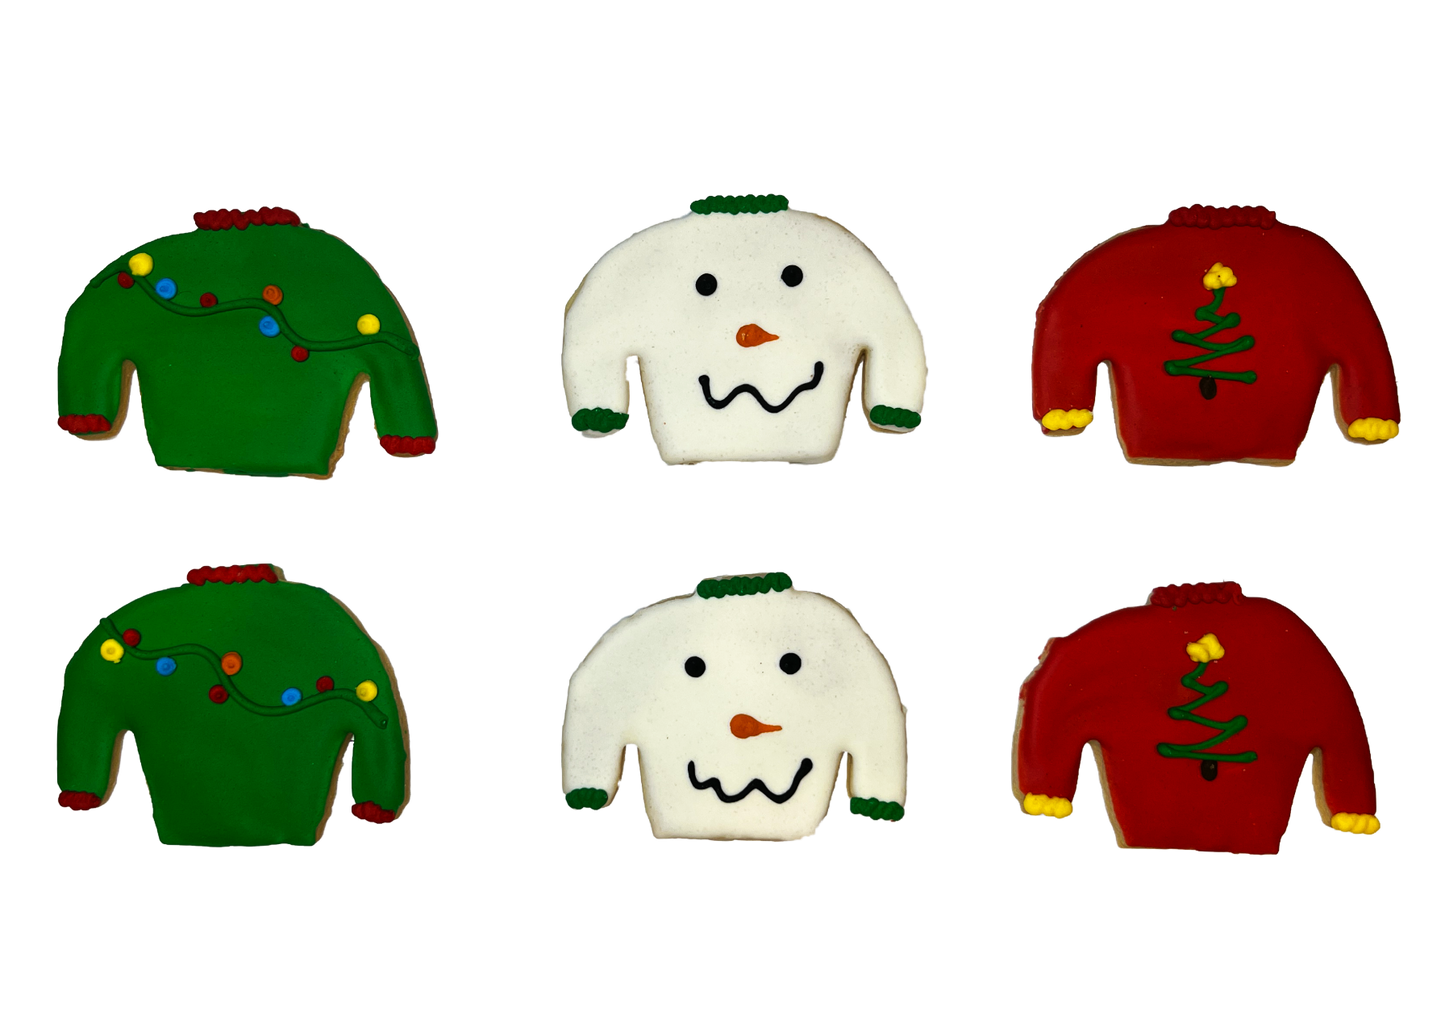 Ugly Sweater Cookies-EventCateringHouston.com